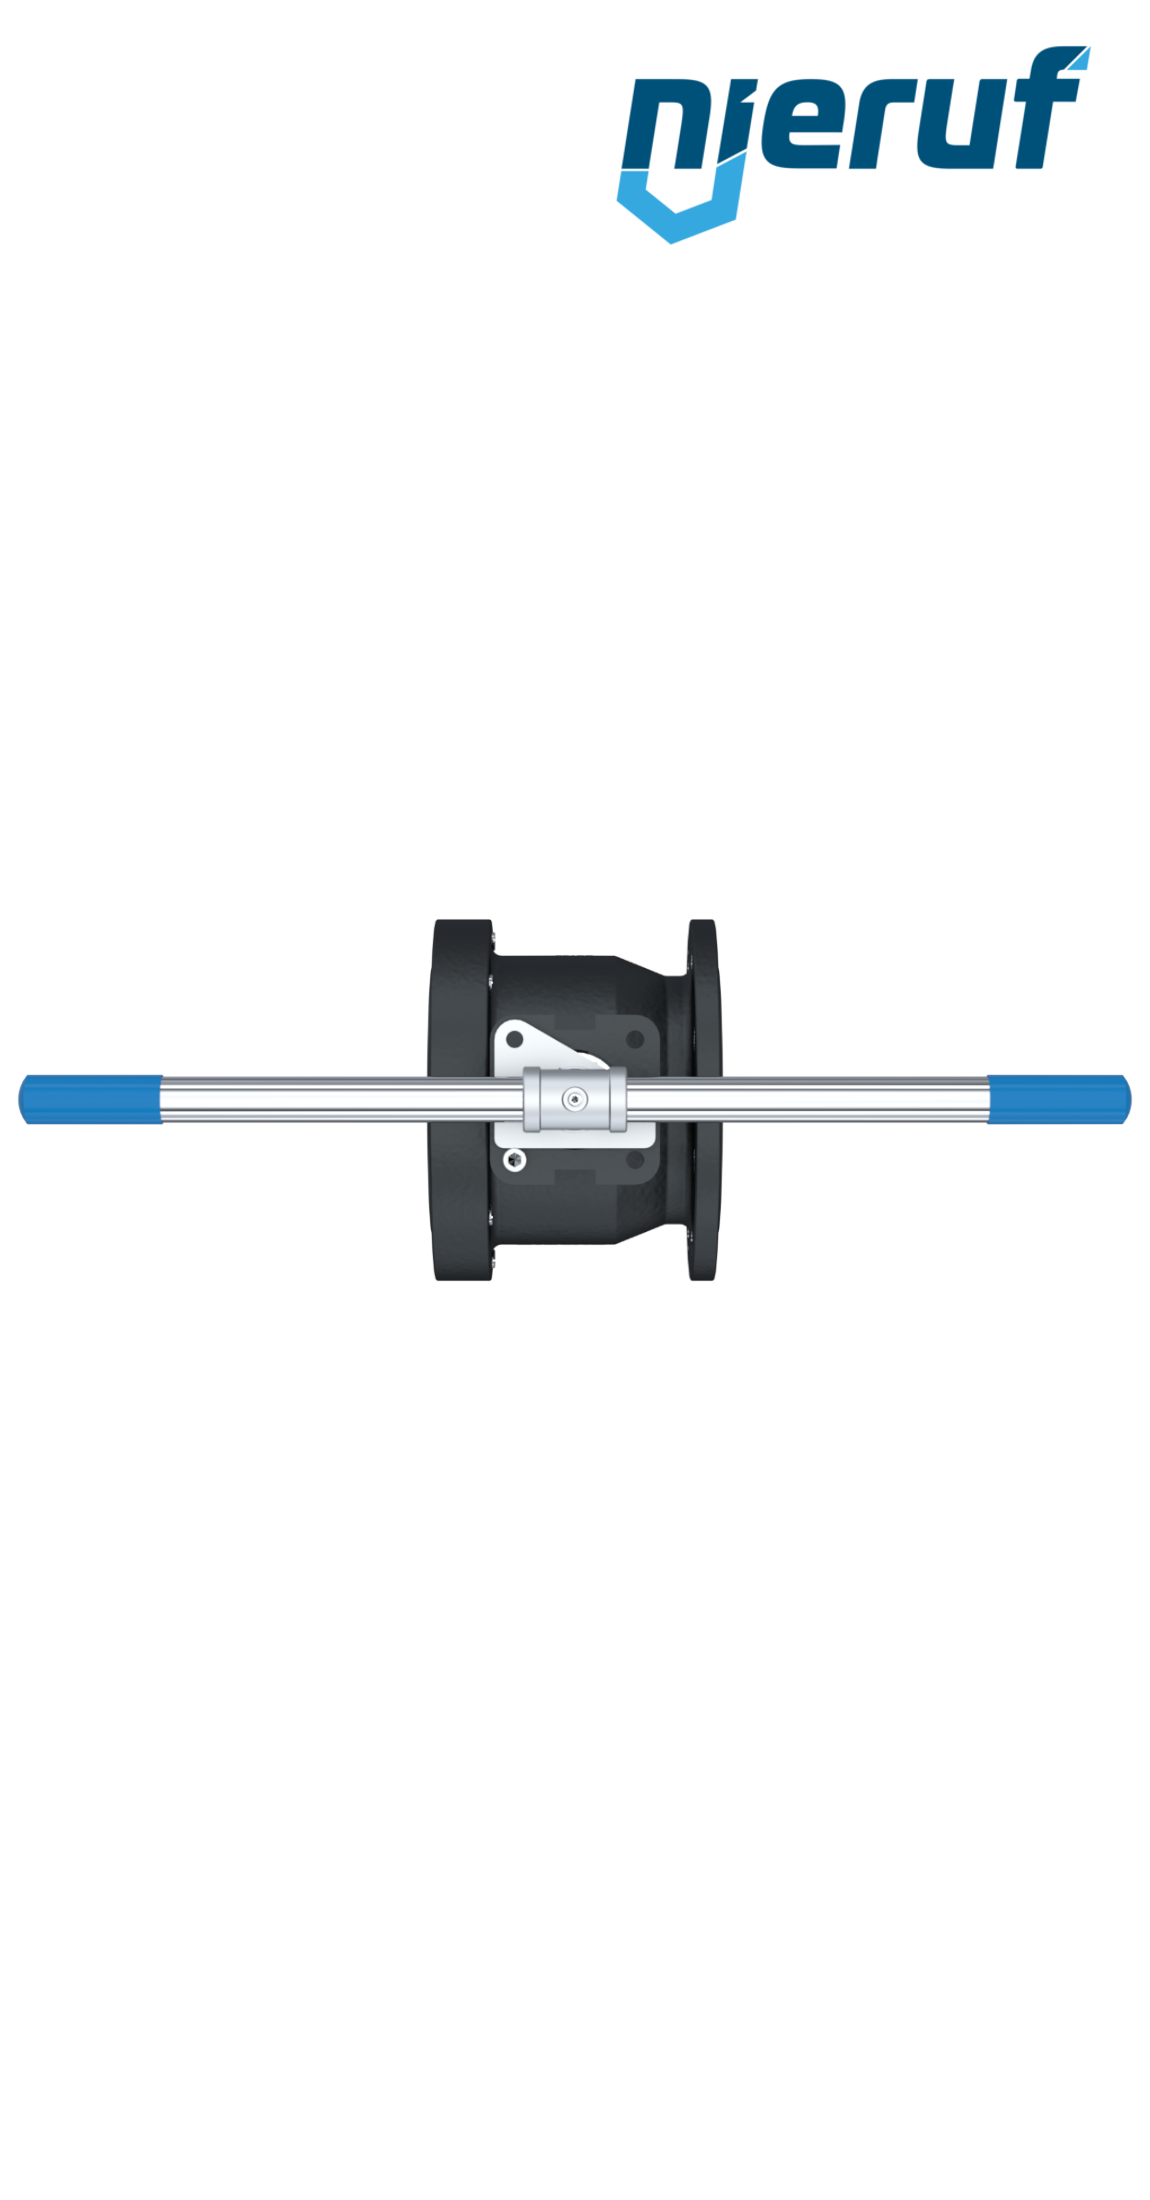 Compact ball valve DN125 PN16 FK03 carbon steel 1.0619 ball stainless steel 1.4408